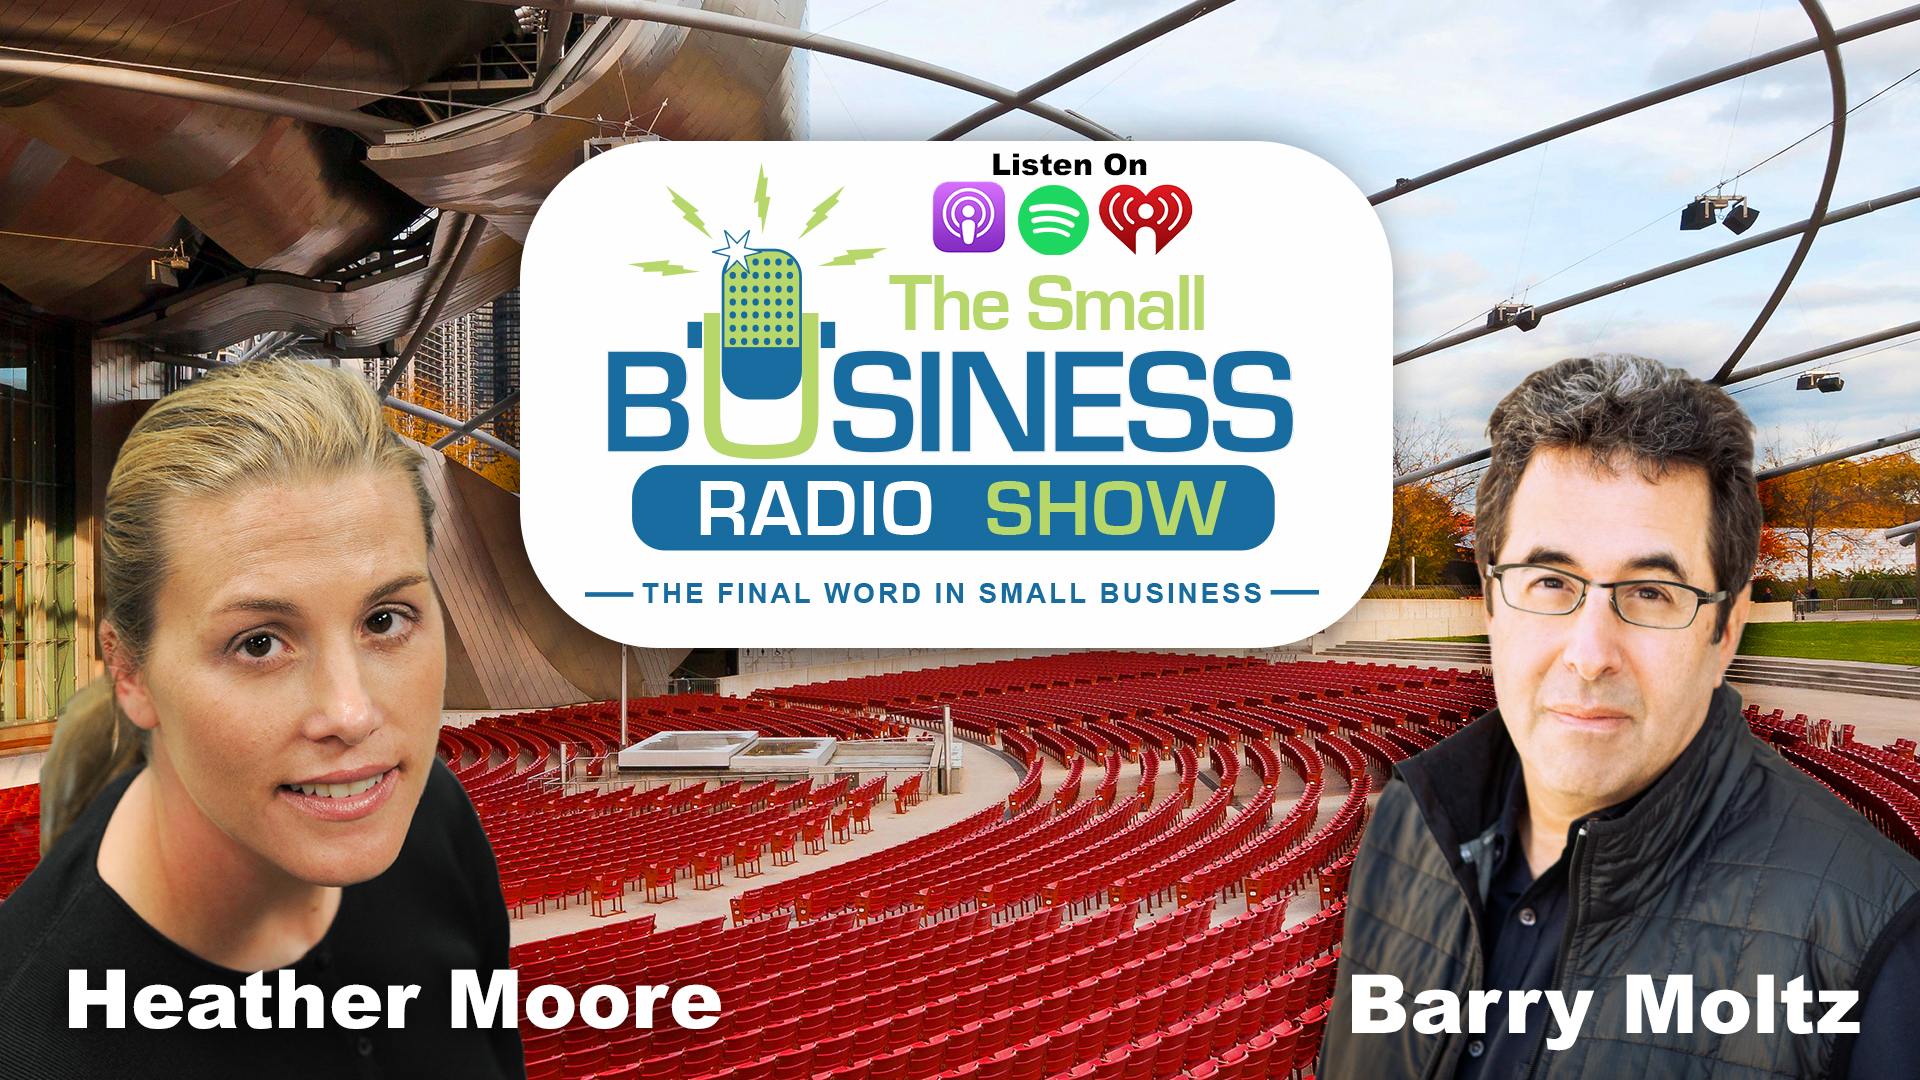 Heather Moore on The Small Business Radio Show